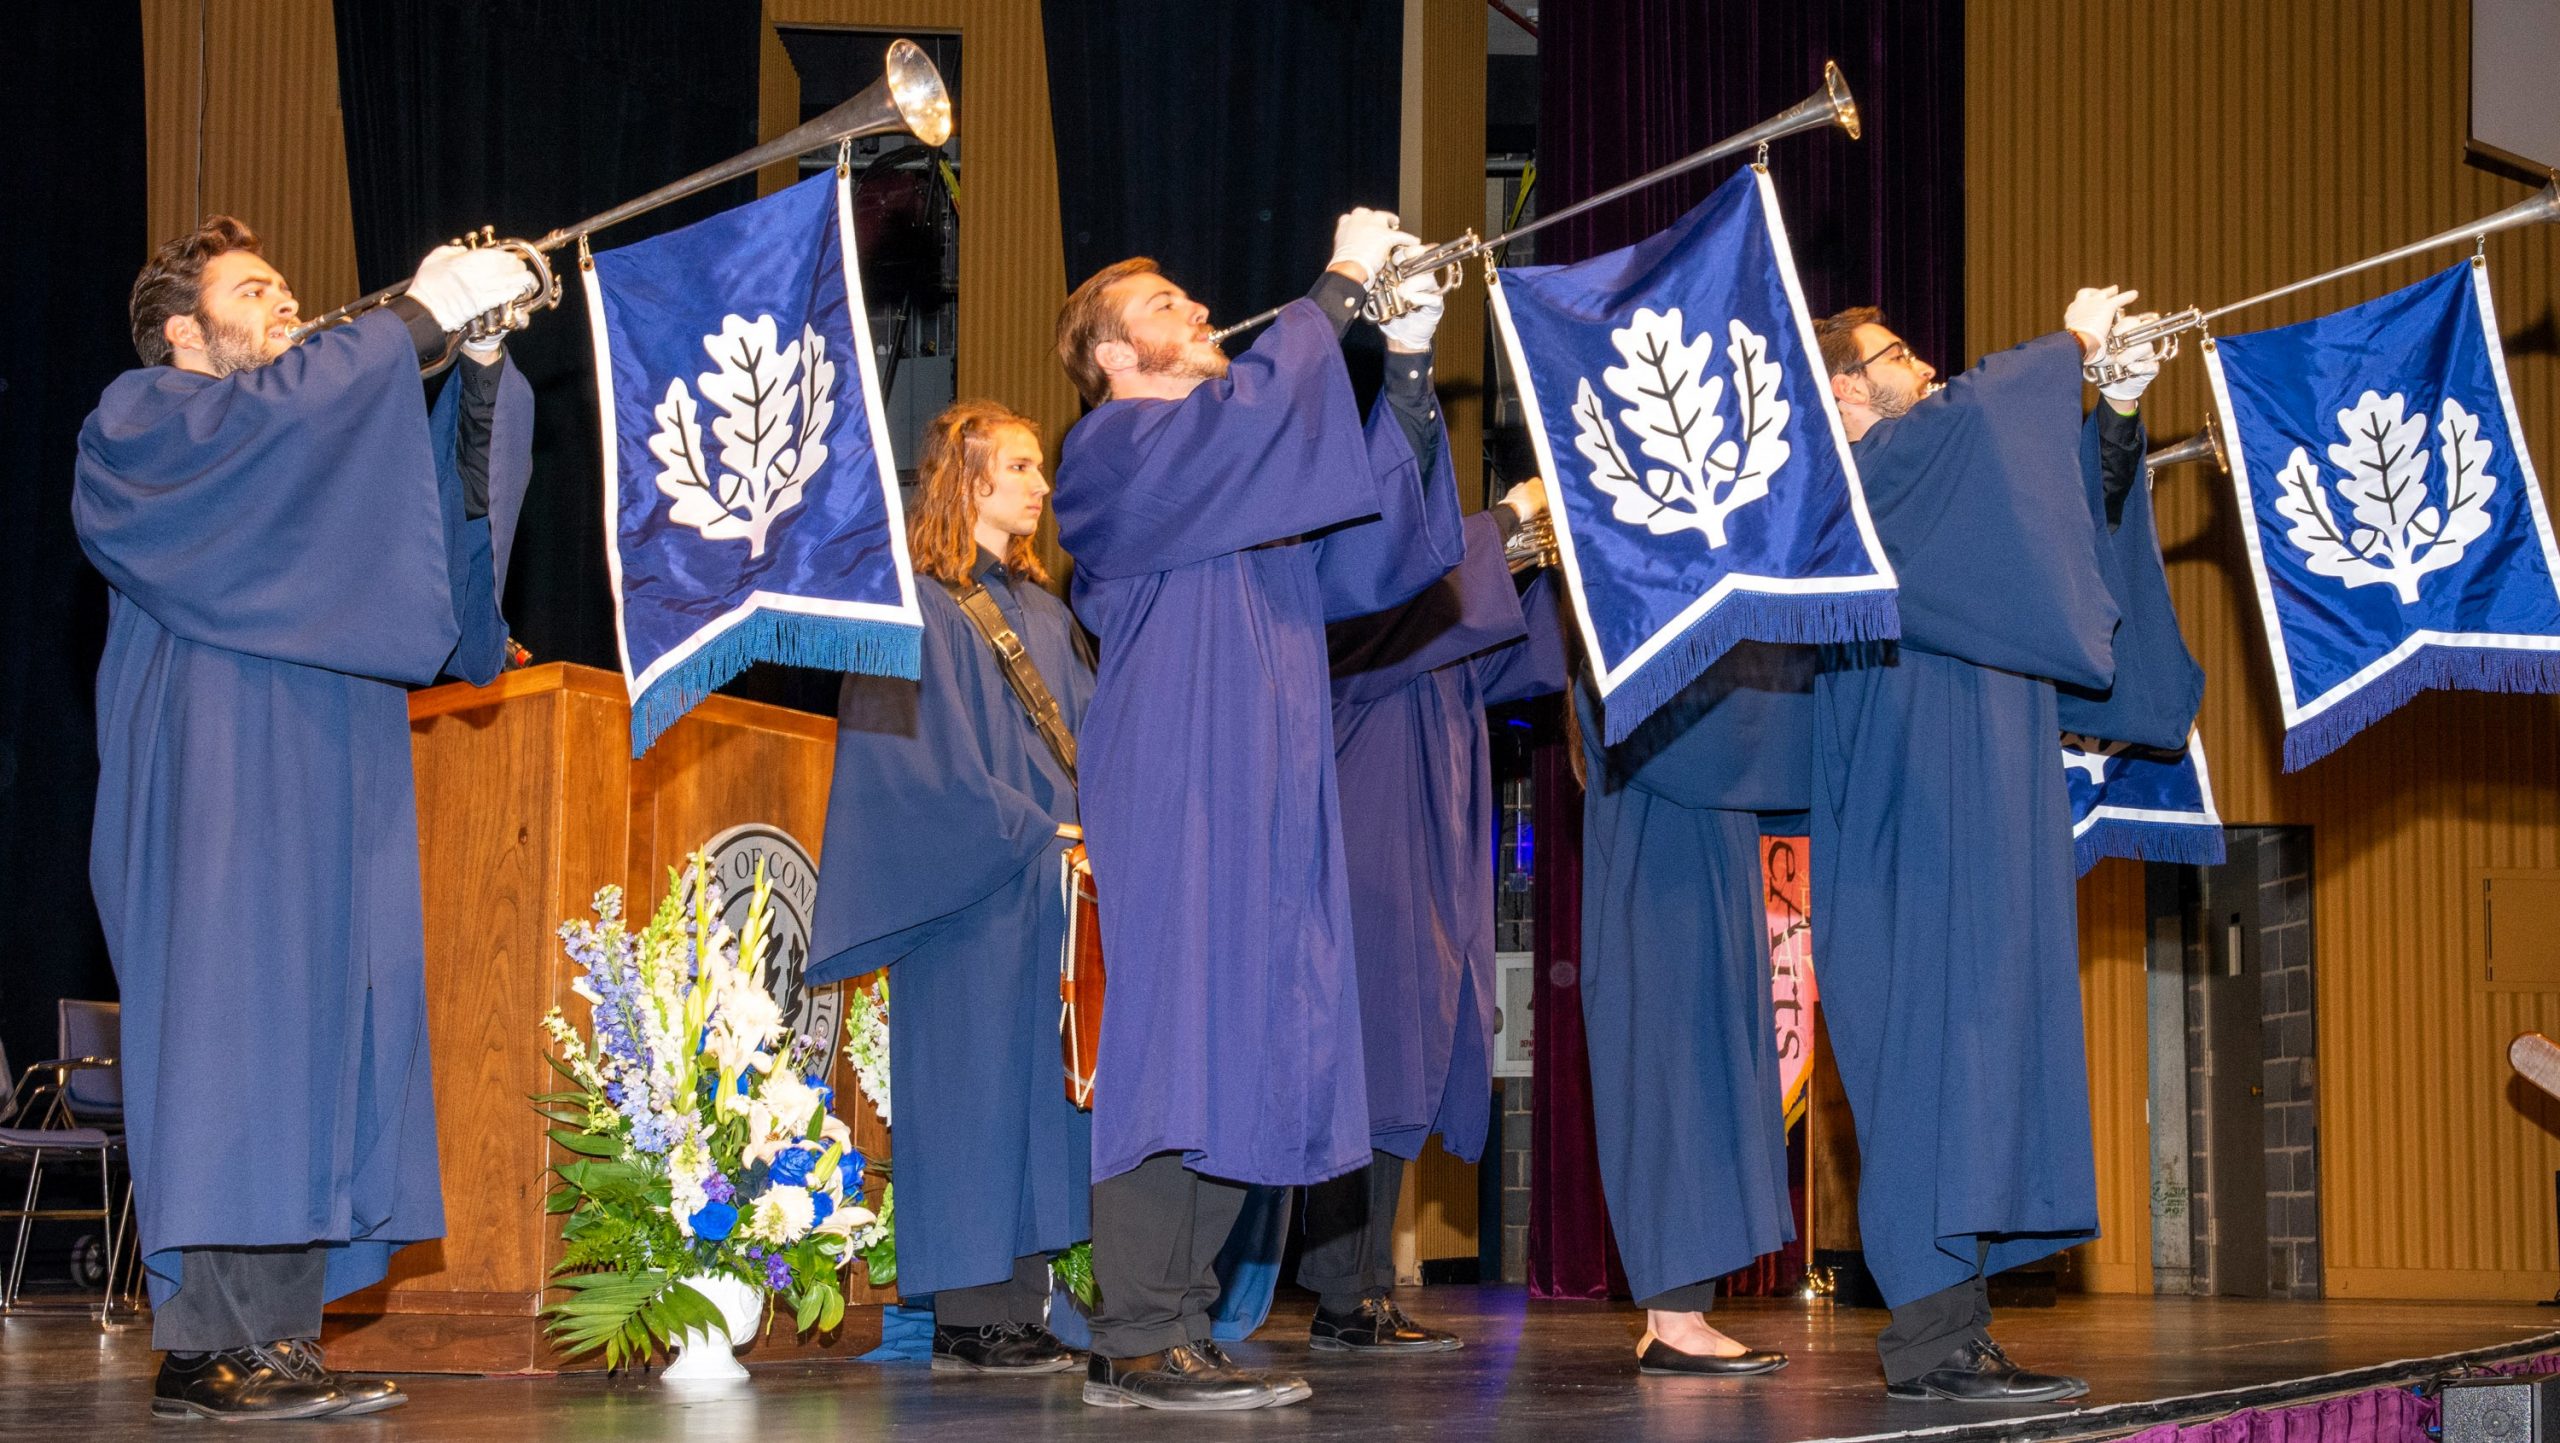 Group of people in academic robes playing herald trumpets with UConn insignia flags on a stage